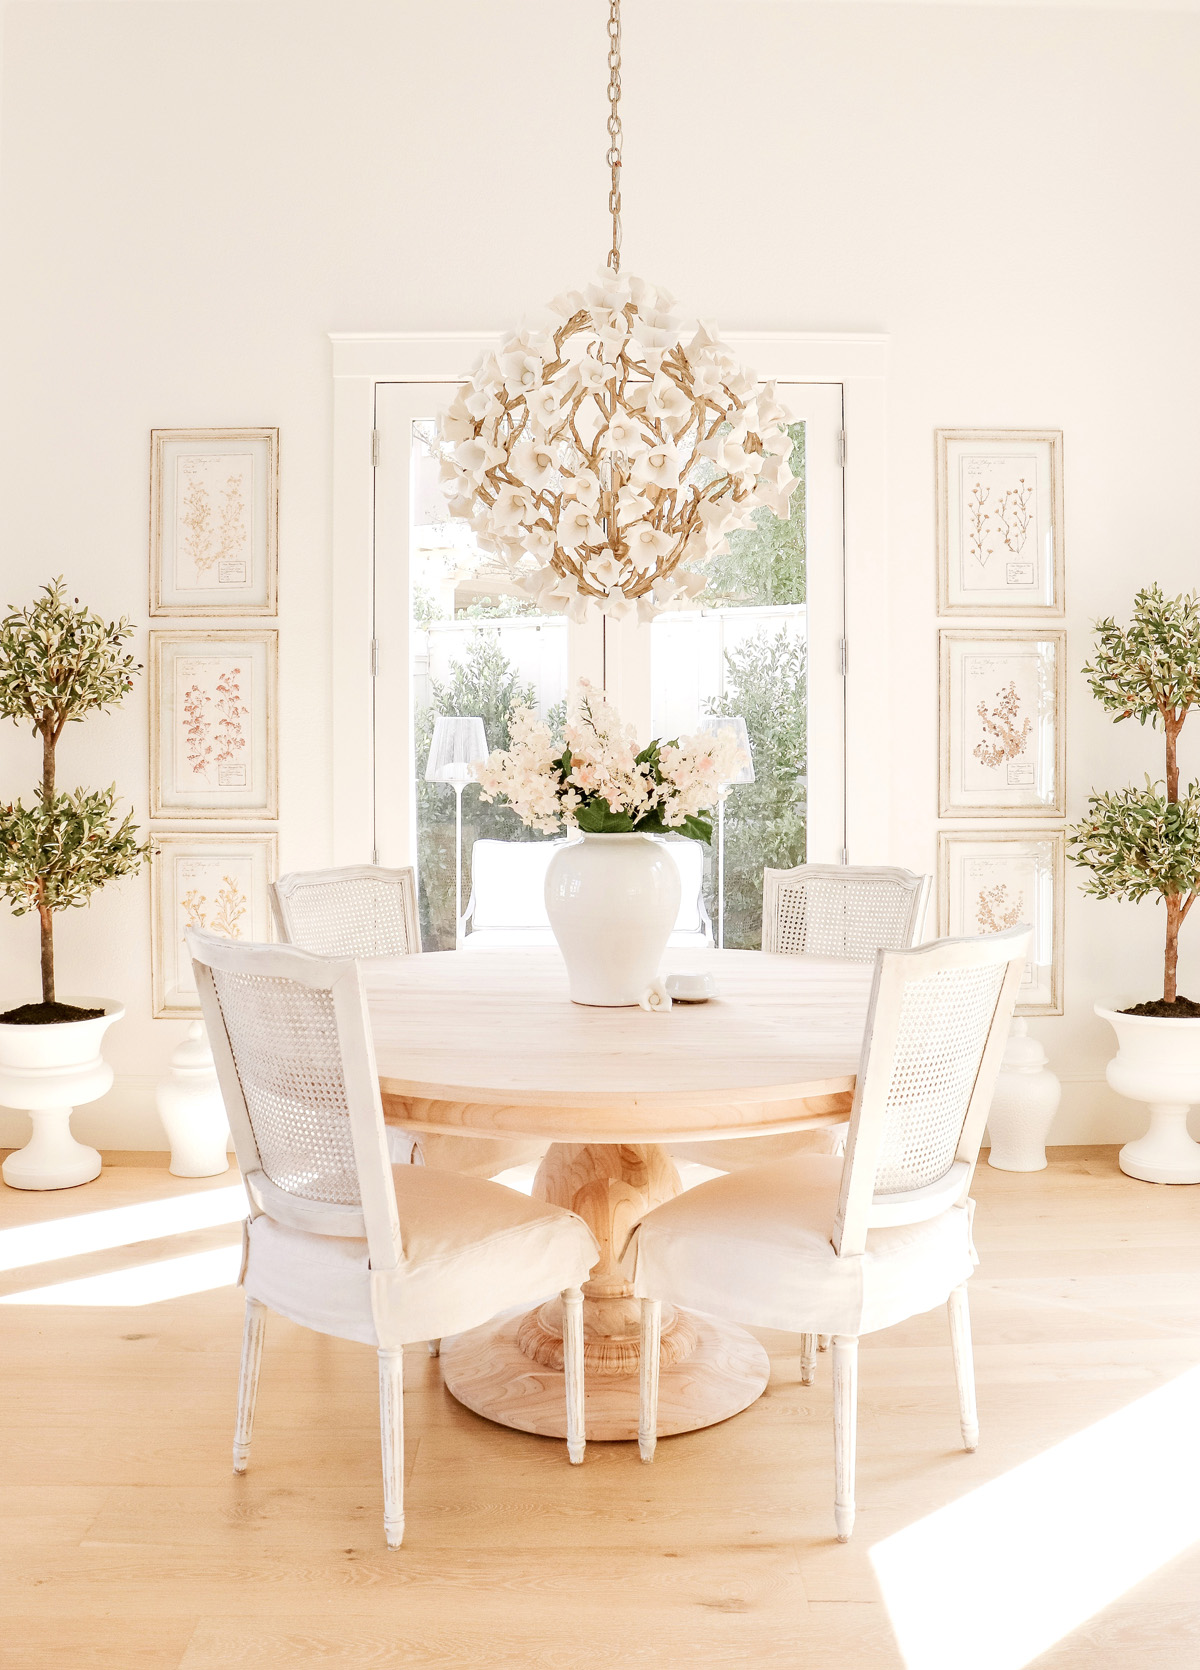 Wayfair's Memorial Day Sales are HERE! Through the weekend TONS of home decor are up to 70% off like dining room, family room, bedding, outdoor and more! | Kristy Wicks